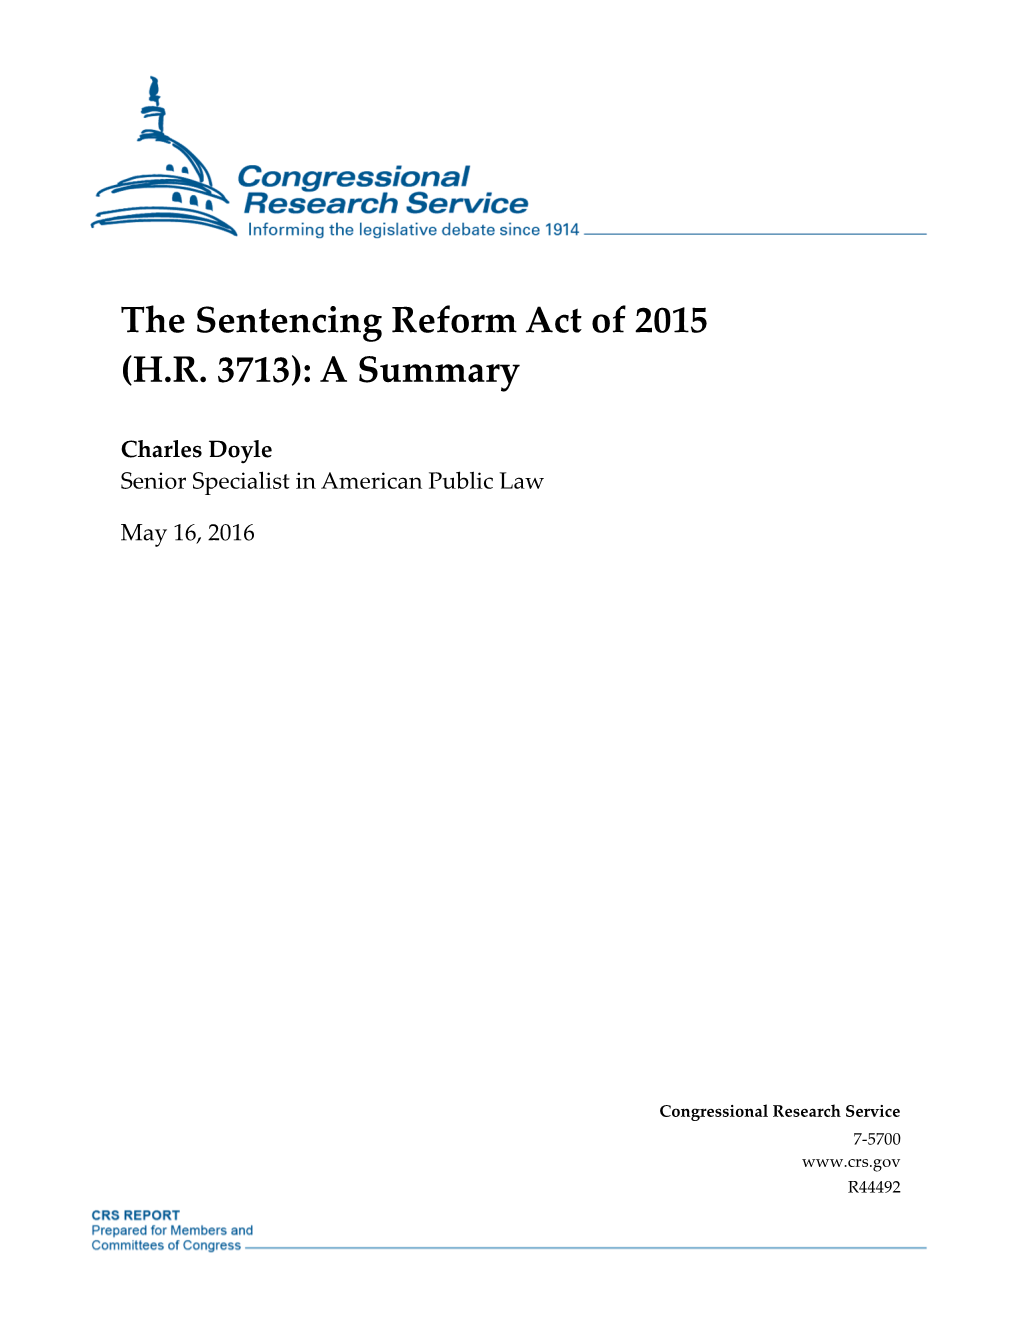 The Sentencing Reform Act of 2015 (H.R